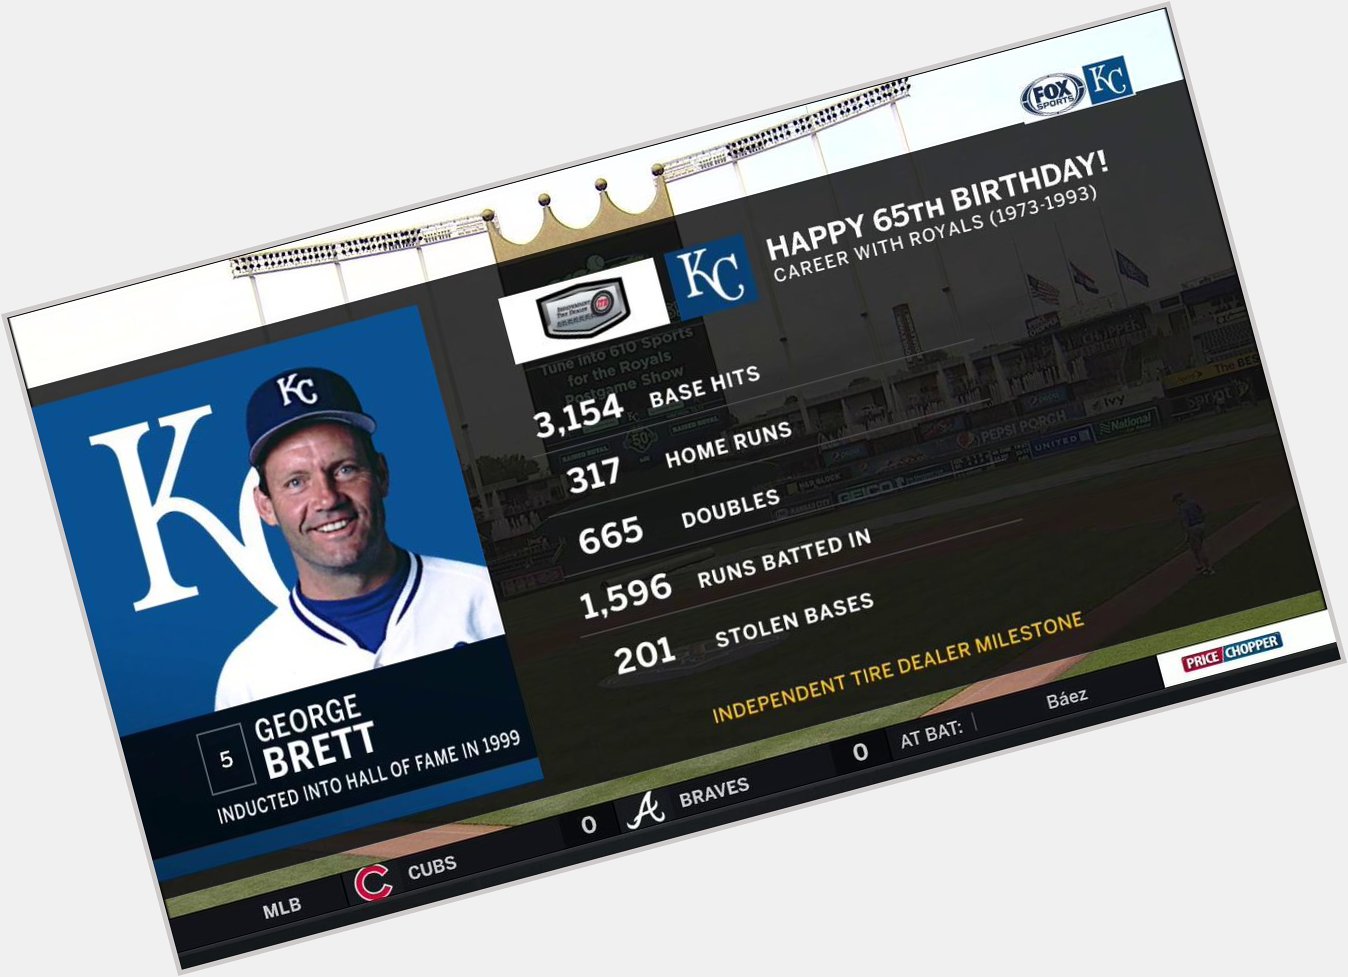 65 never looked so good. Happy birthday to THE George Brett! 